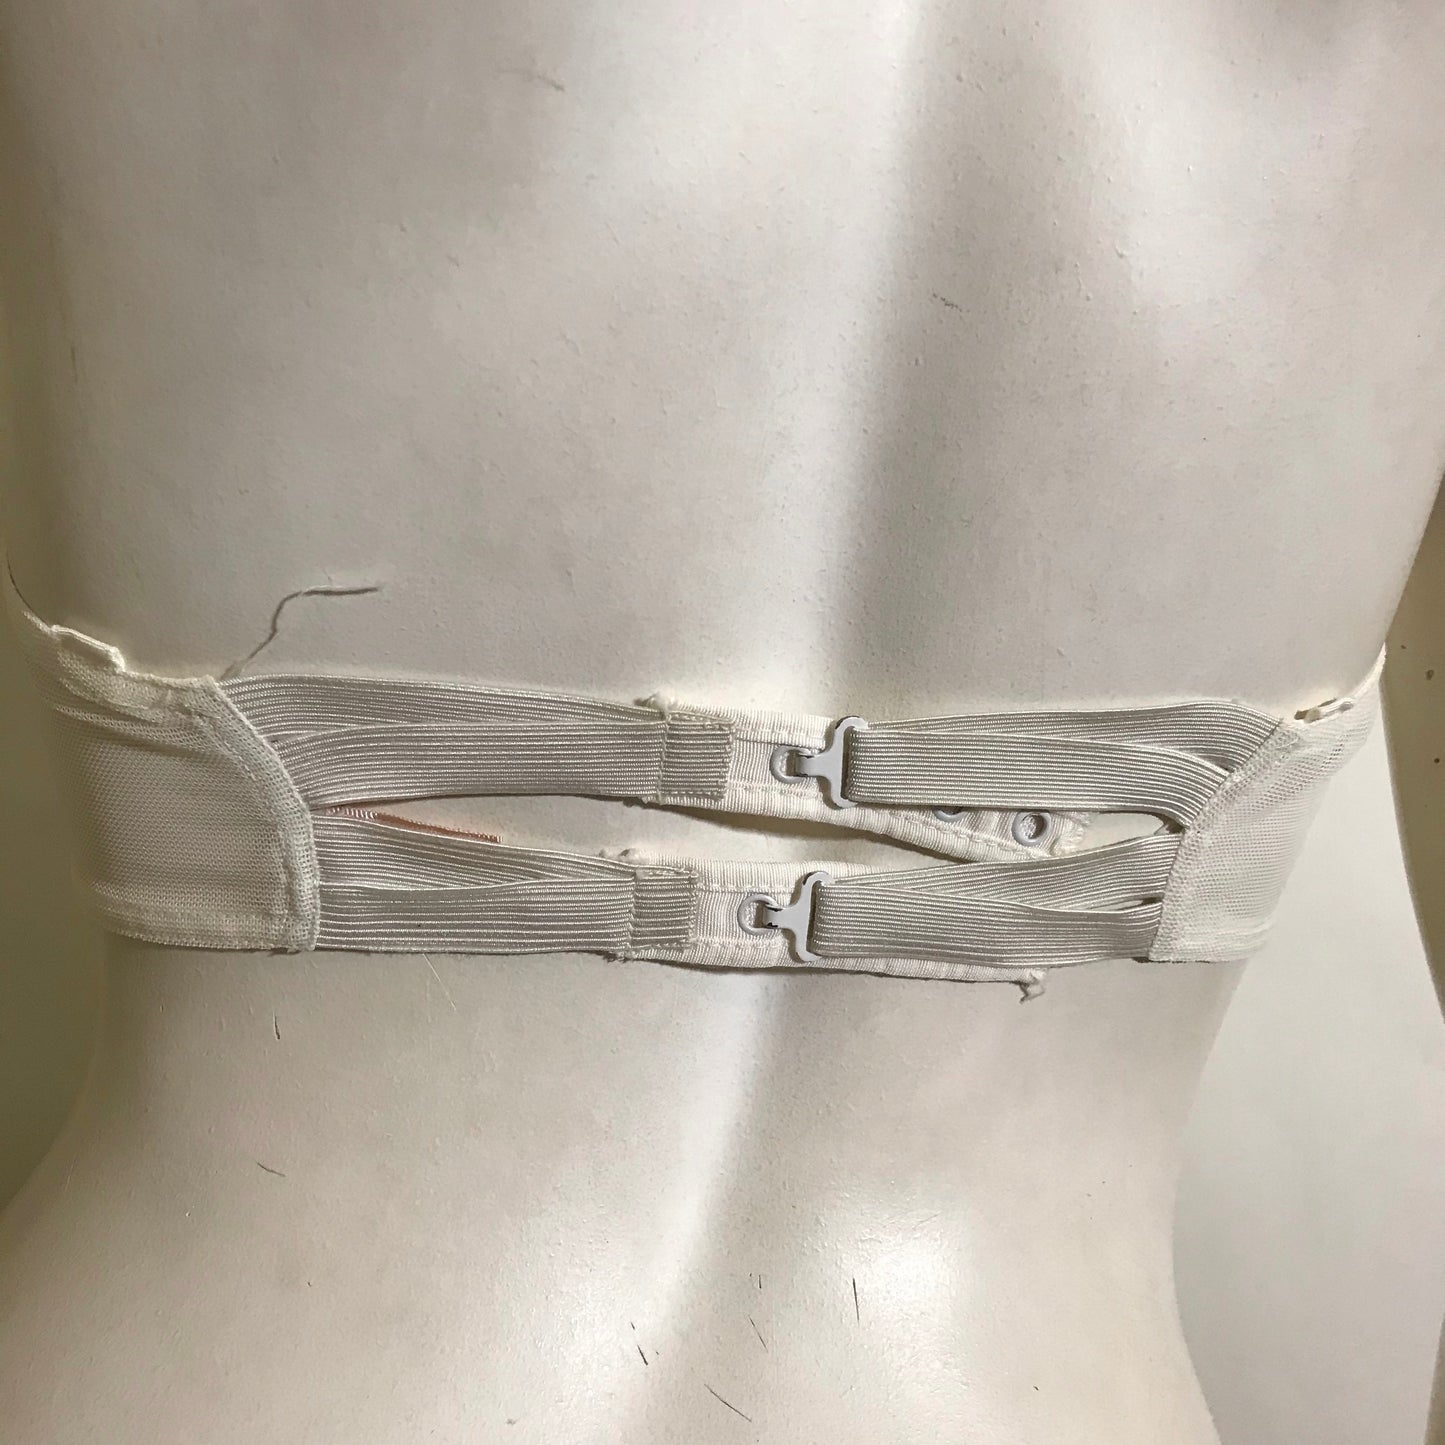 White Overbust Wire Circle Cup Bullet Bra circa 1950s